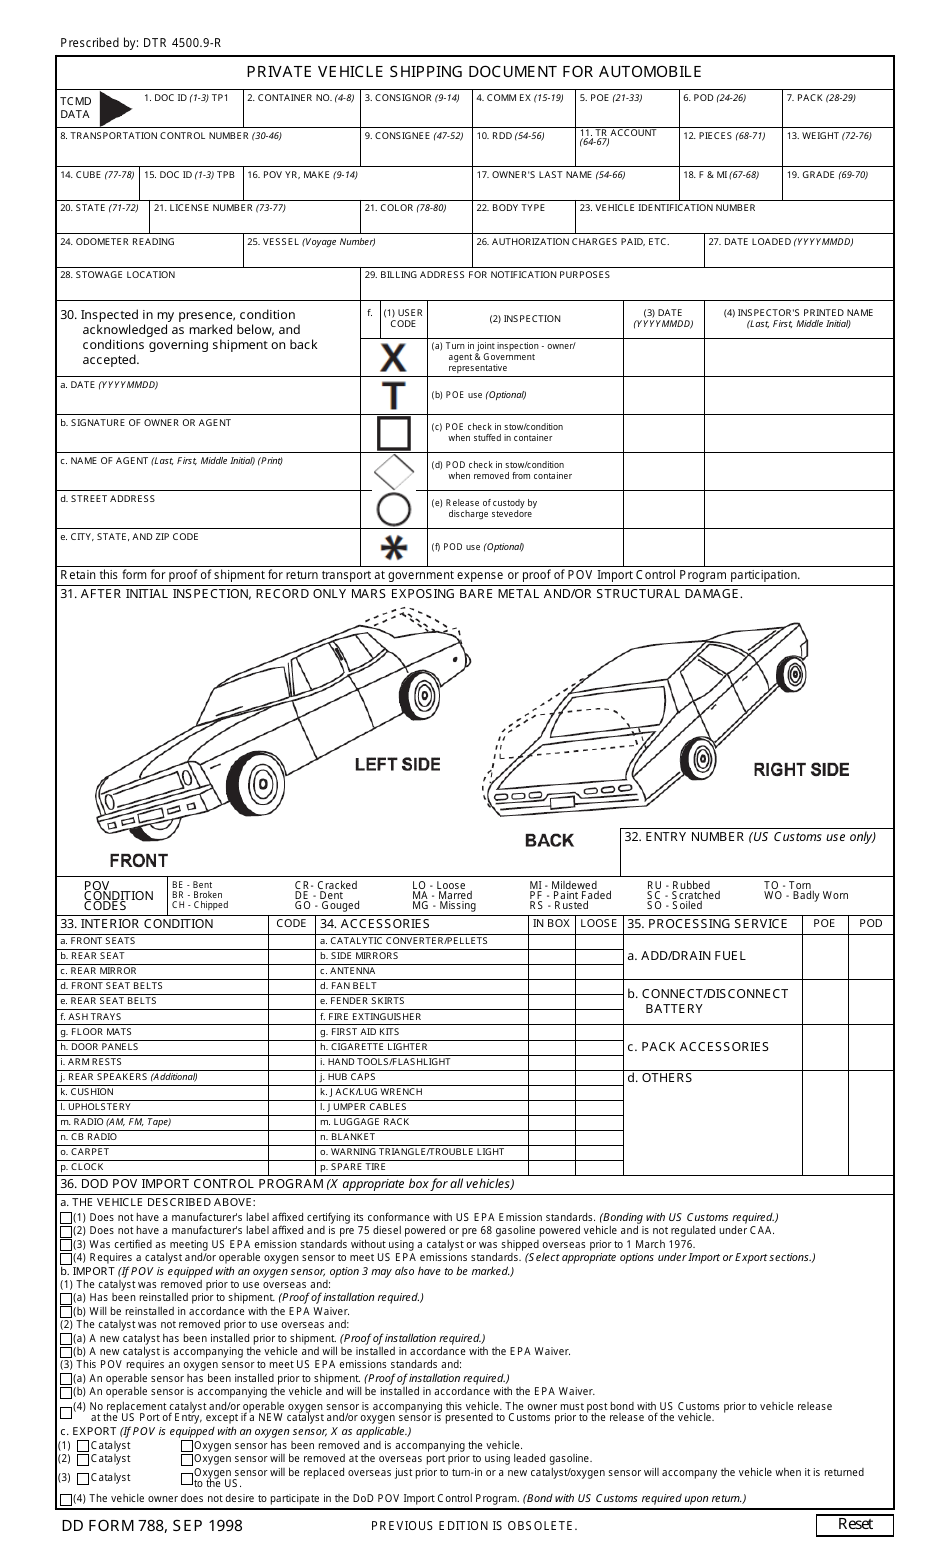 DD Form 788 Private Vehicle Shipping Document for Automobile, Page 1